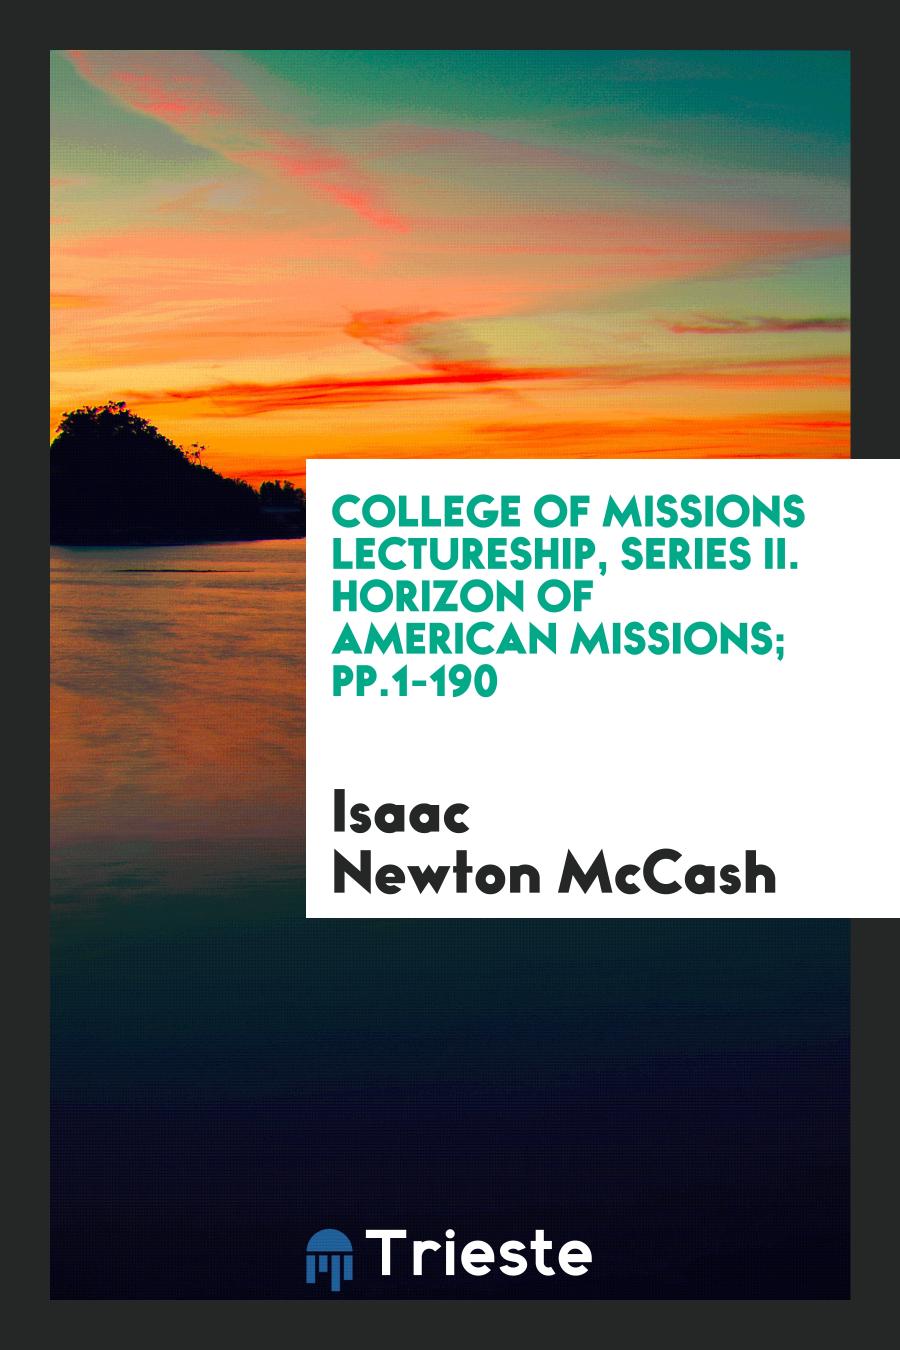 College of Missions Lectureship, Series II. Horizon of American Missions; pp.1-190